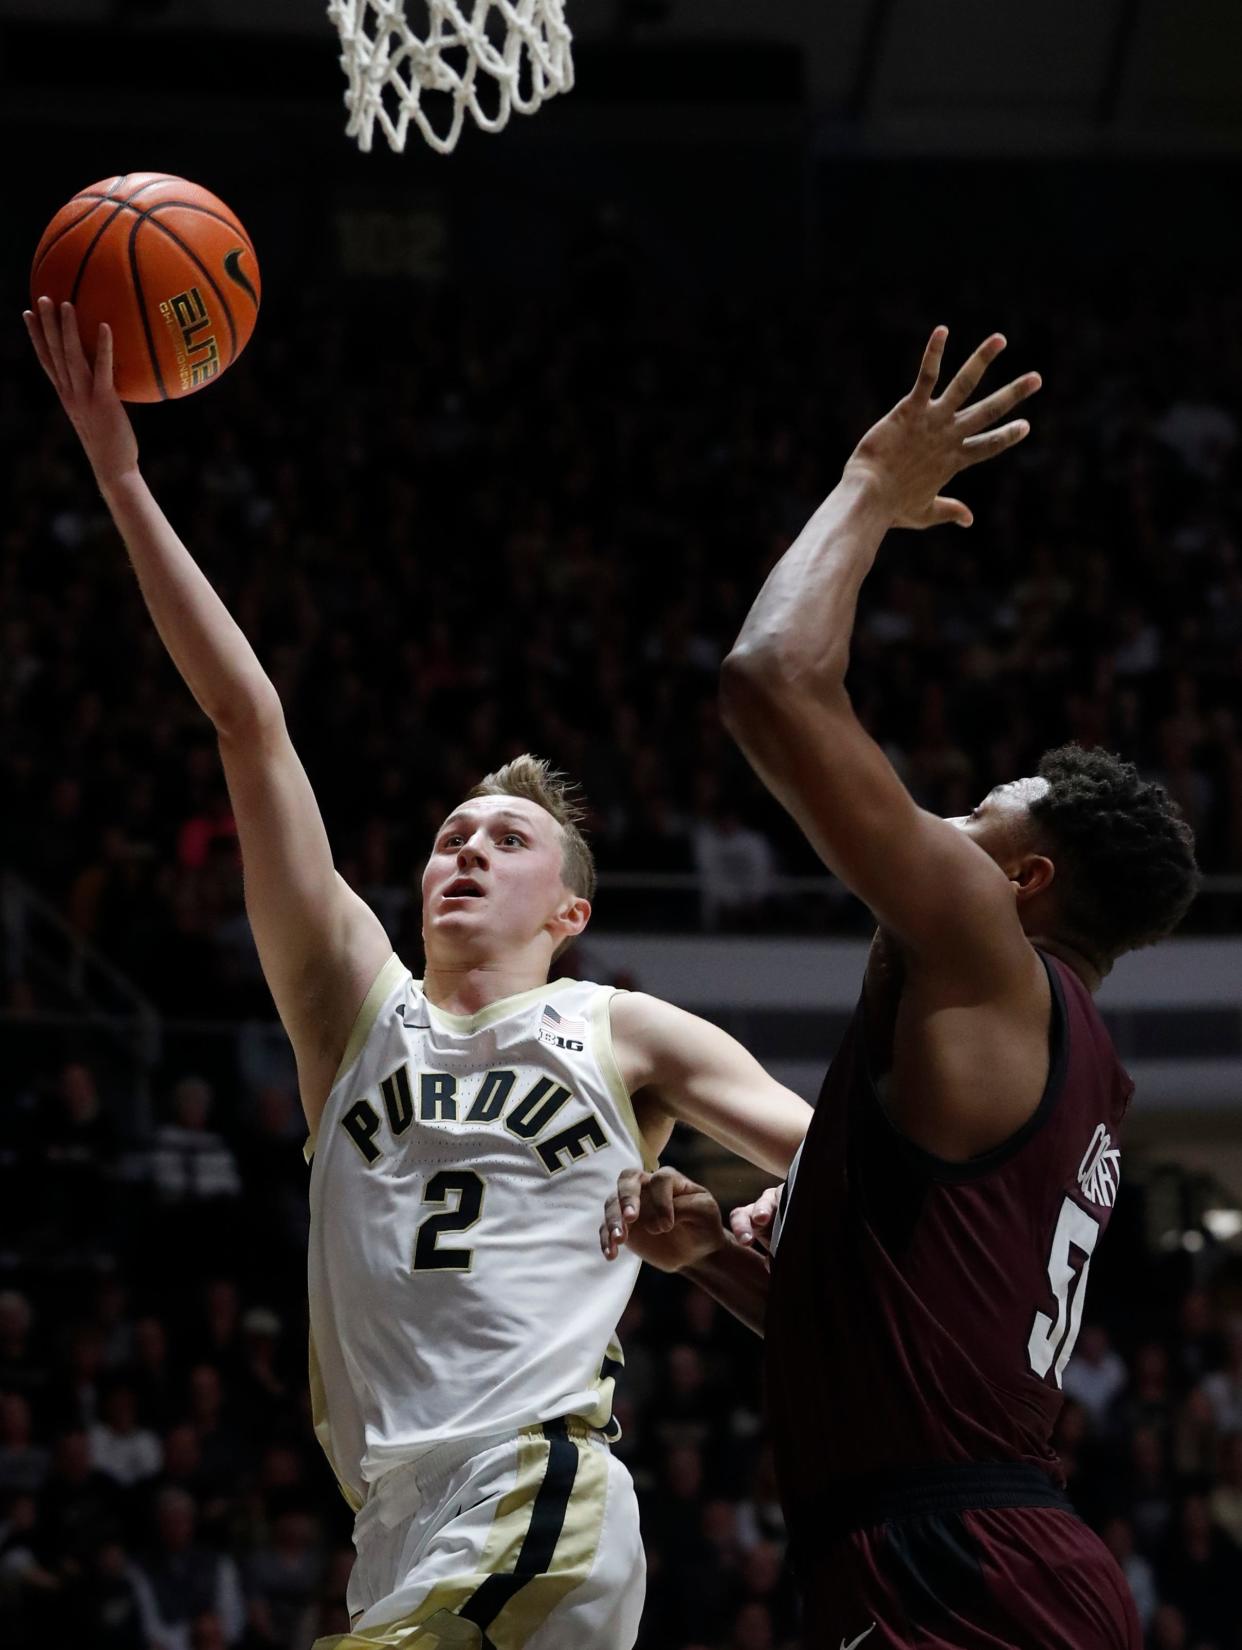 Purdue Boilermakers guard Fletcher Loyer (2) shoots the ball over Eastern Kentucky Colonels forward Isaiah Cozart (50) during the NCAA men’s basketball game, Friday, Dec. 29, 2023, at Mackey Arena in West Lafayette, Ind. Purdue Boilermakers won 80-53.